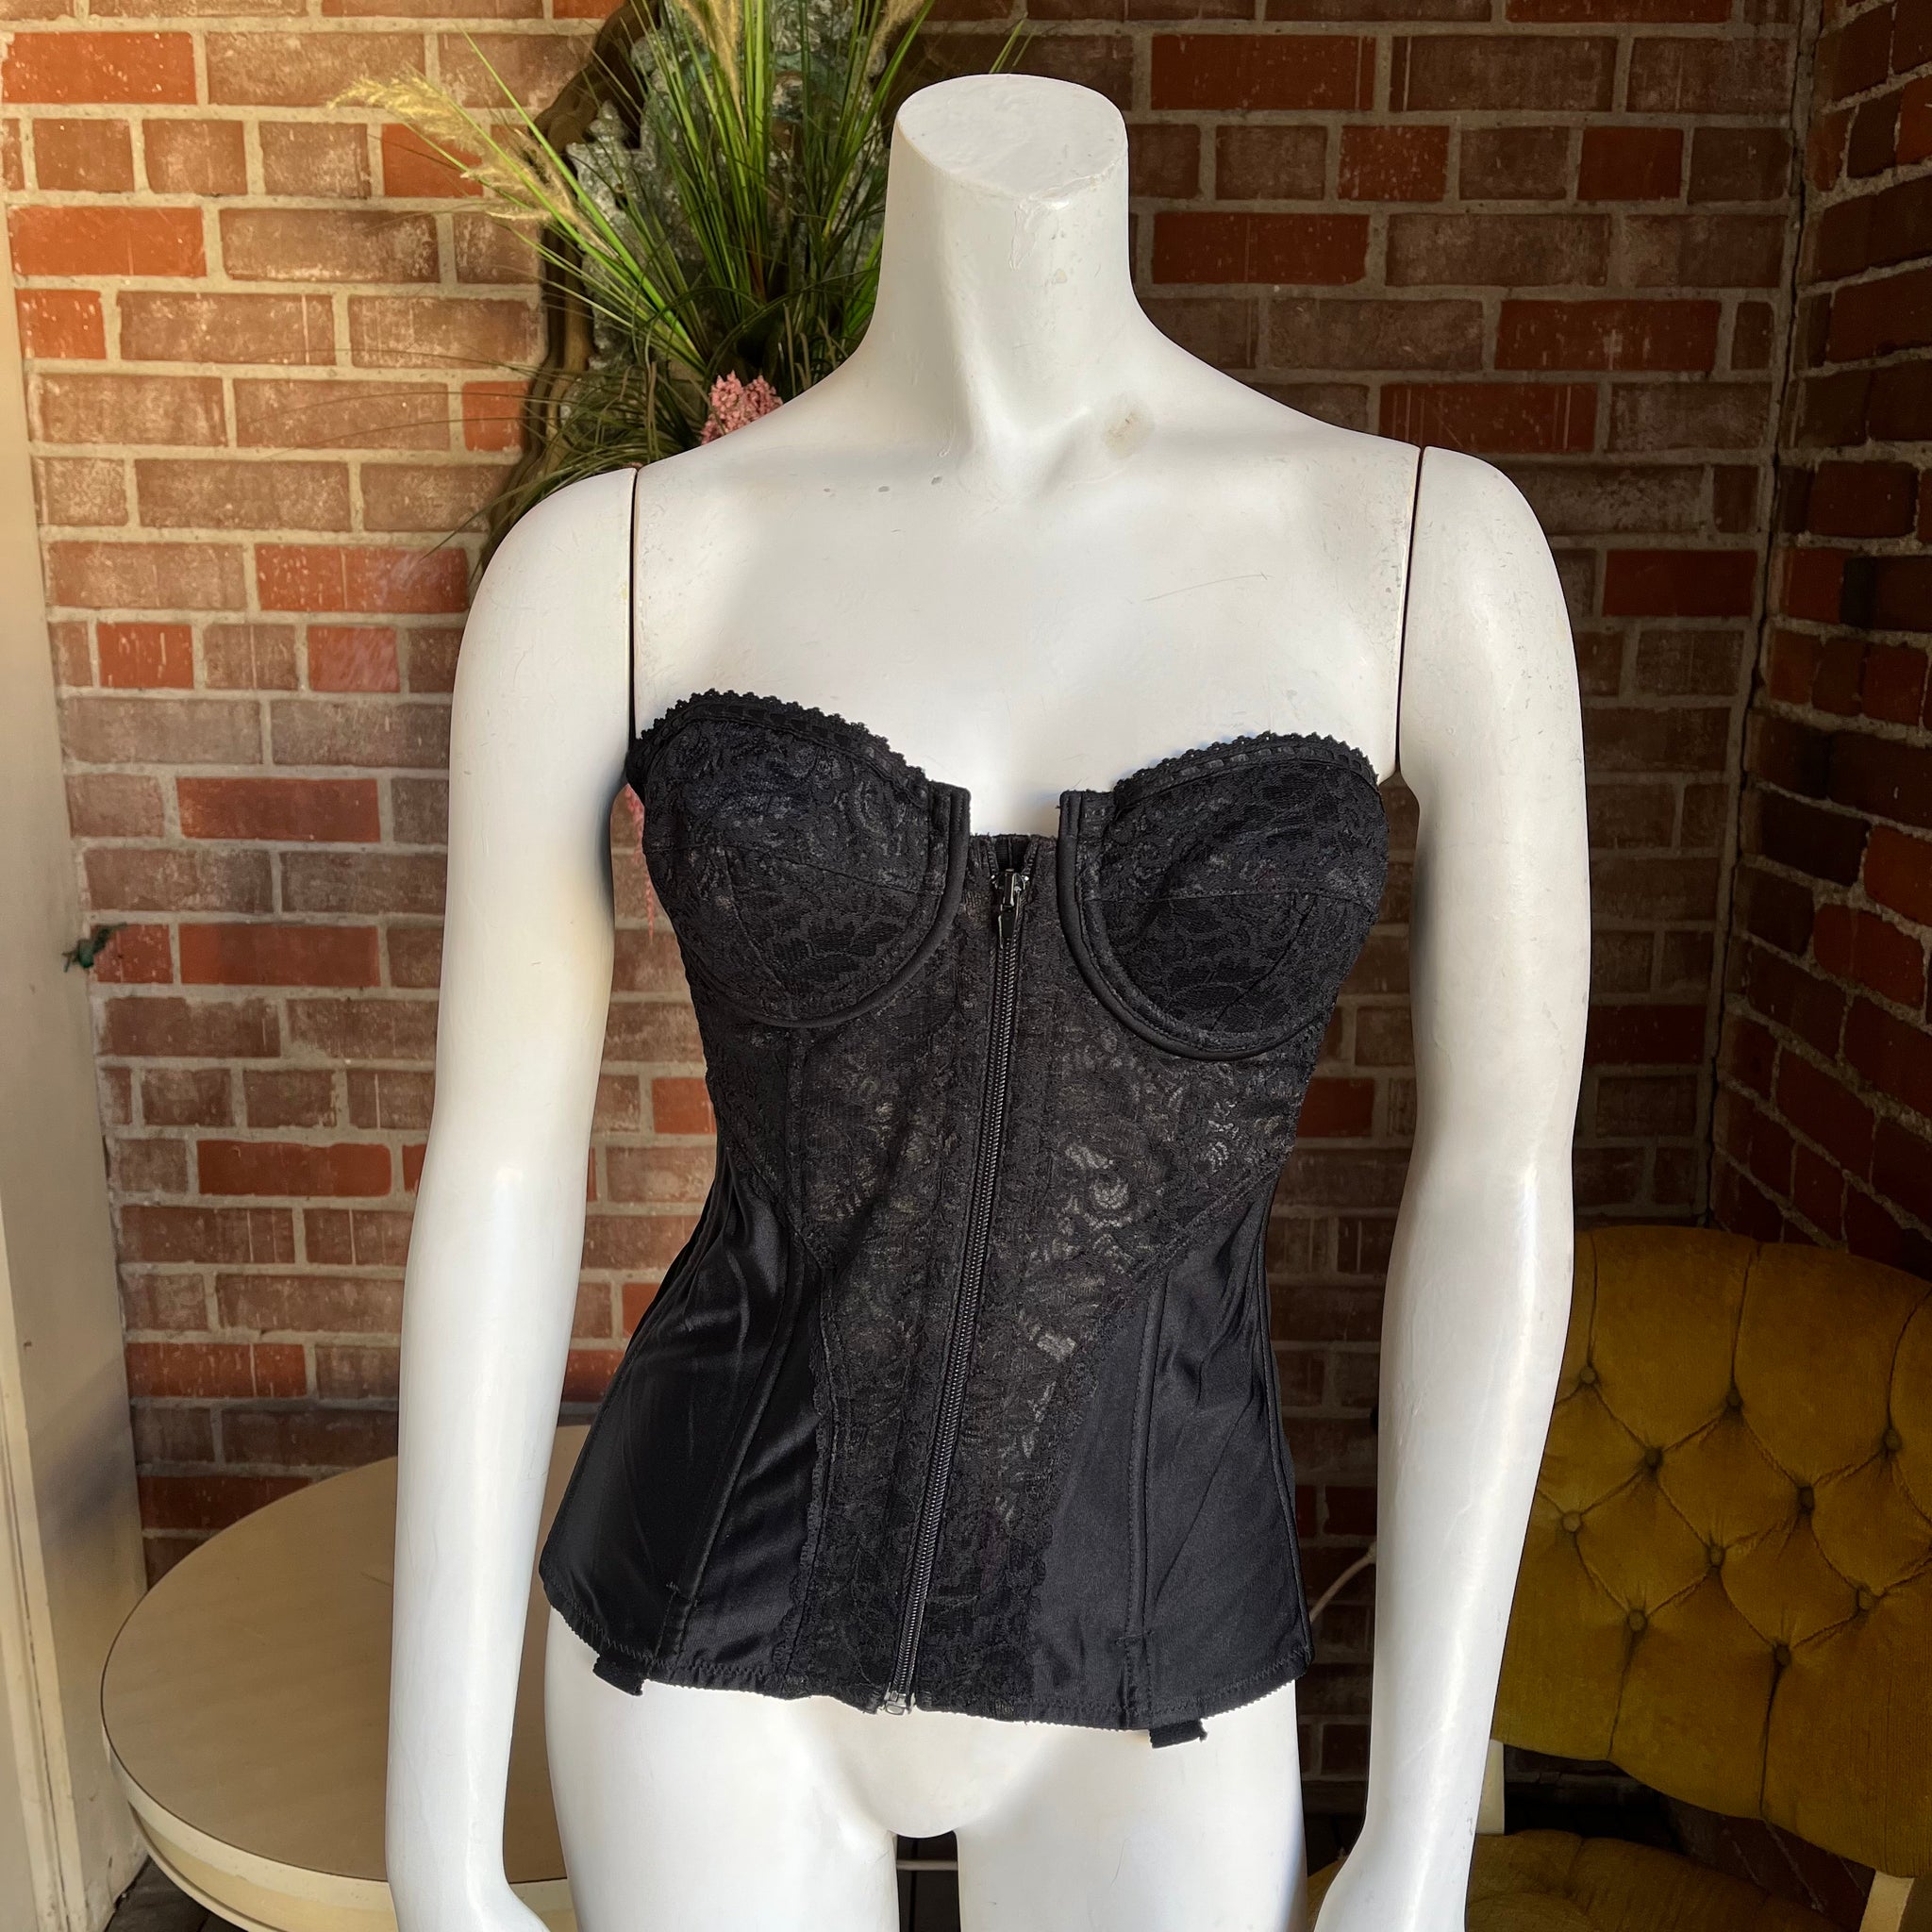 Fredericks of Hollywood Bustier